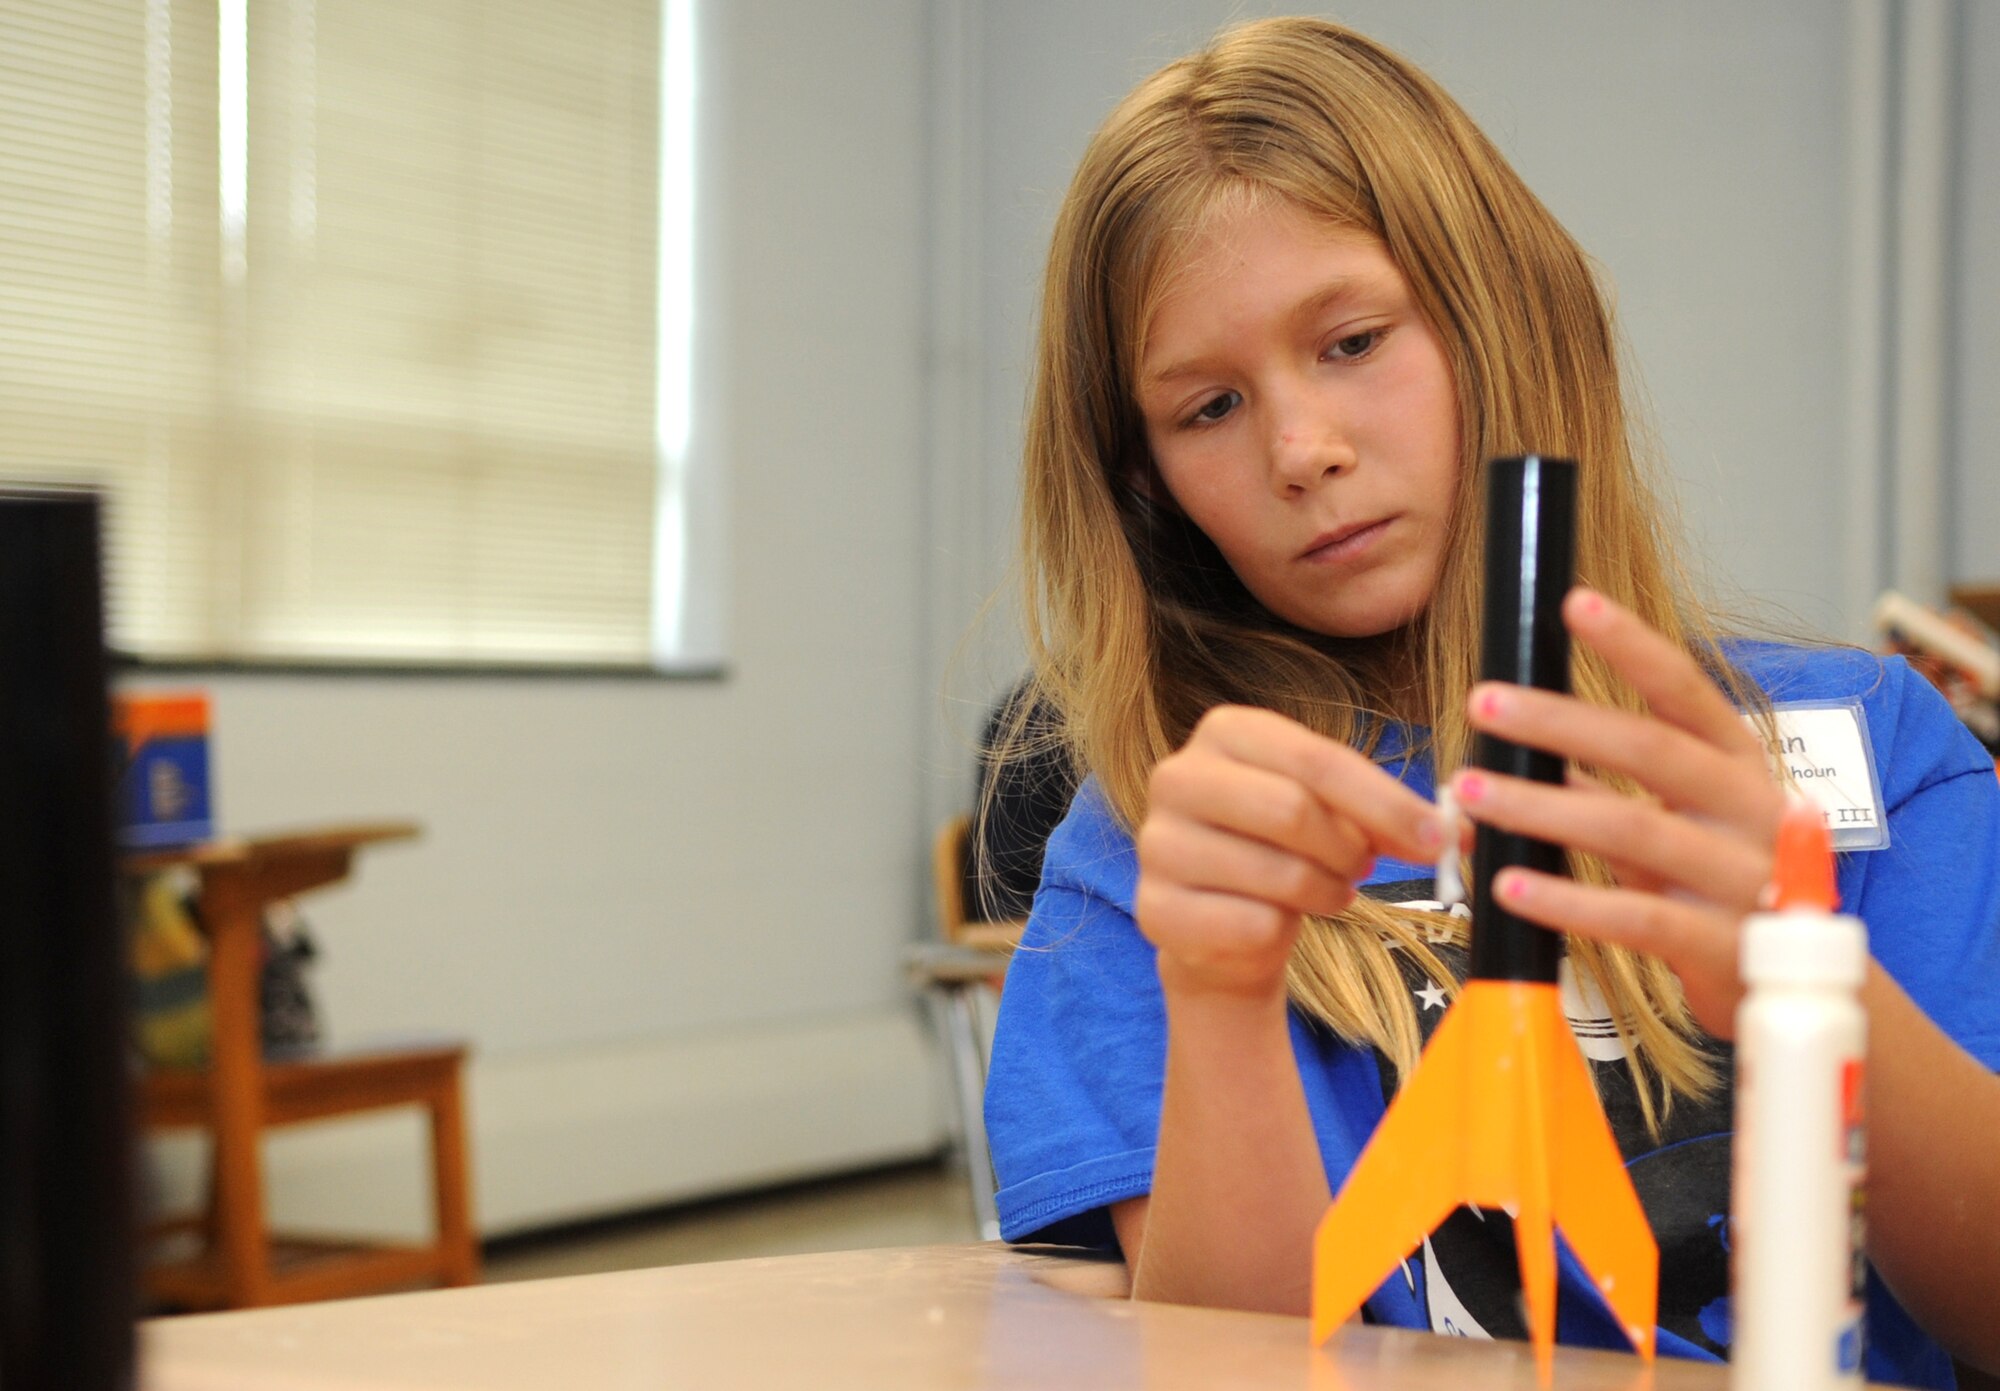 A Science and Technology Academies Reinforcing Basic Aviation and Space Exploration student assembles a miniature rocket during her flight’s time in the program’s rocketry class at Greenwood Middle School, June 25, 2015, in Goldsboro, North Carolina. STARBASE students were divided into four flights and spent their mornings learning about rocketry, oceans of air, compass reading and the laws of motion. (U.S. Air Force photo/Senior Airman Ashley J. Thum)